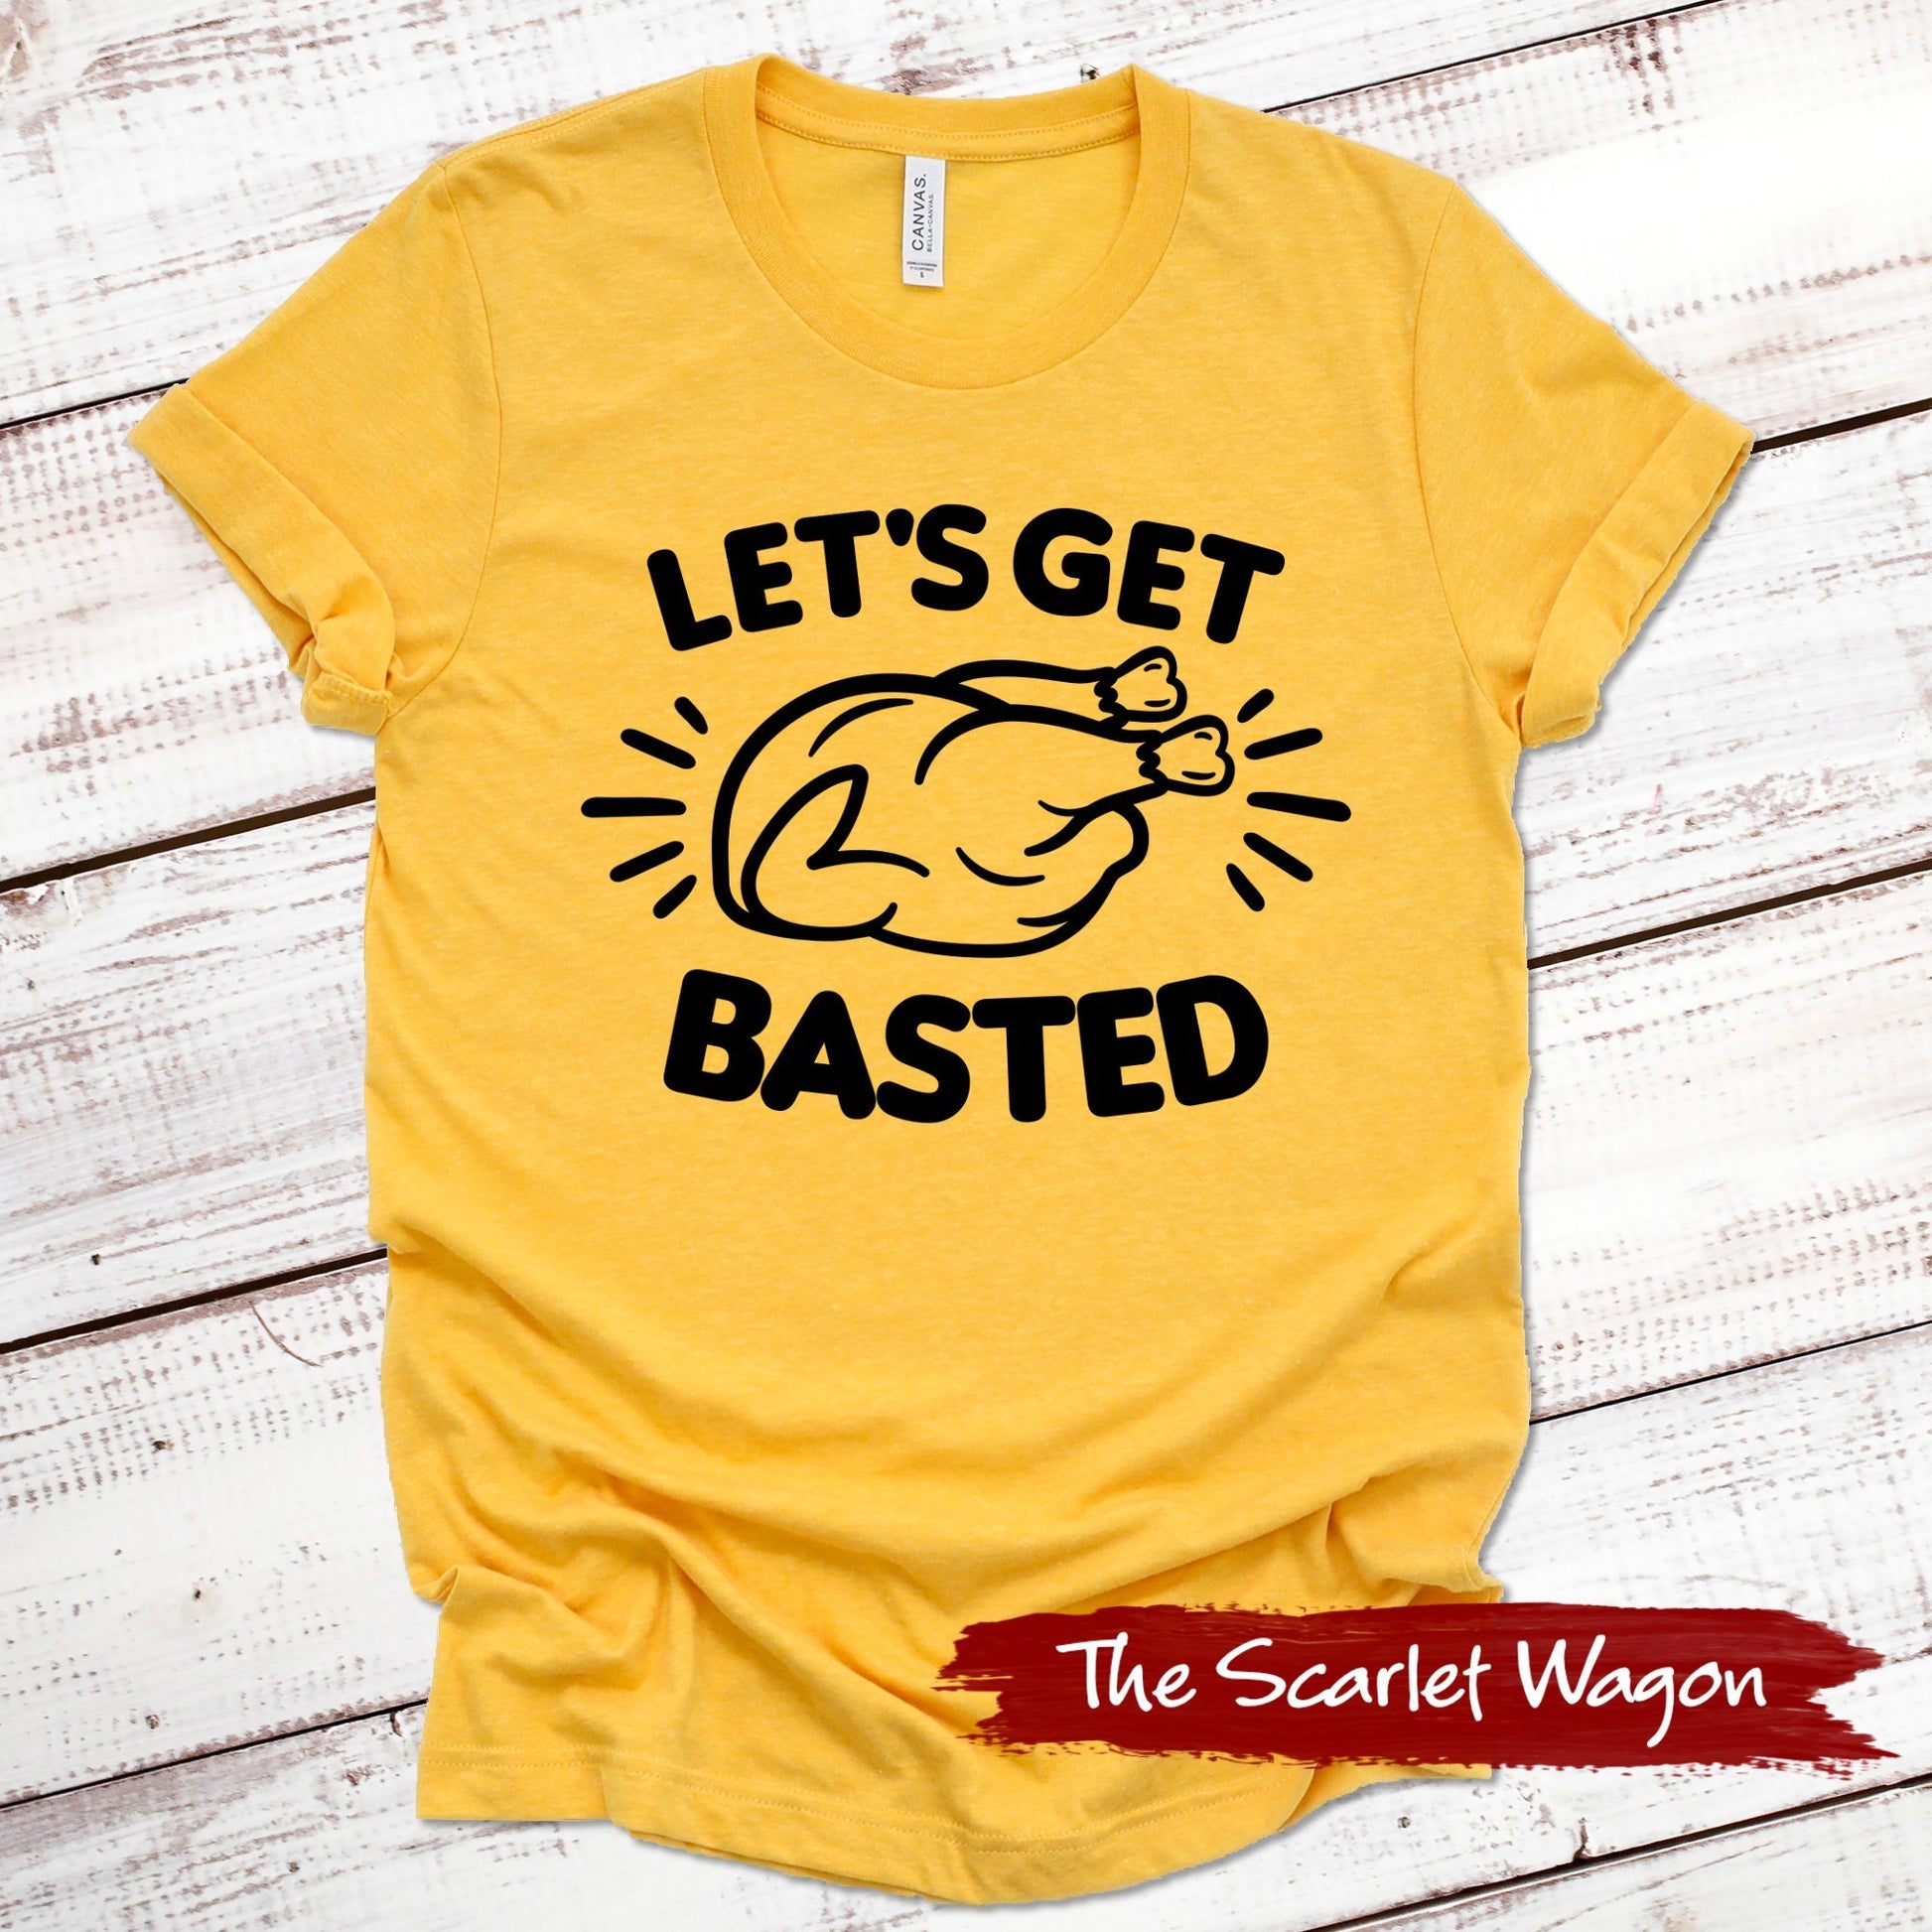 Let's Get Basted Thanksgiving Shirt Scarlet Wagon Heather Gold XS 